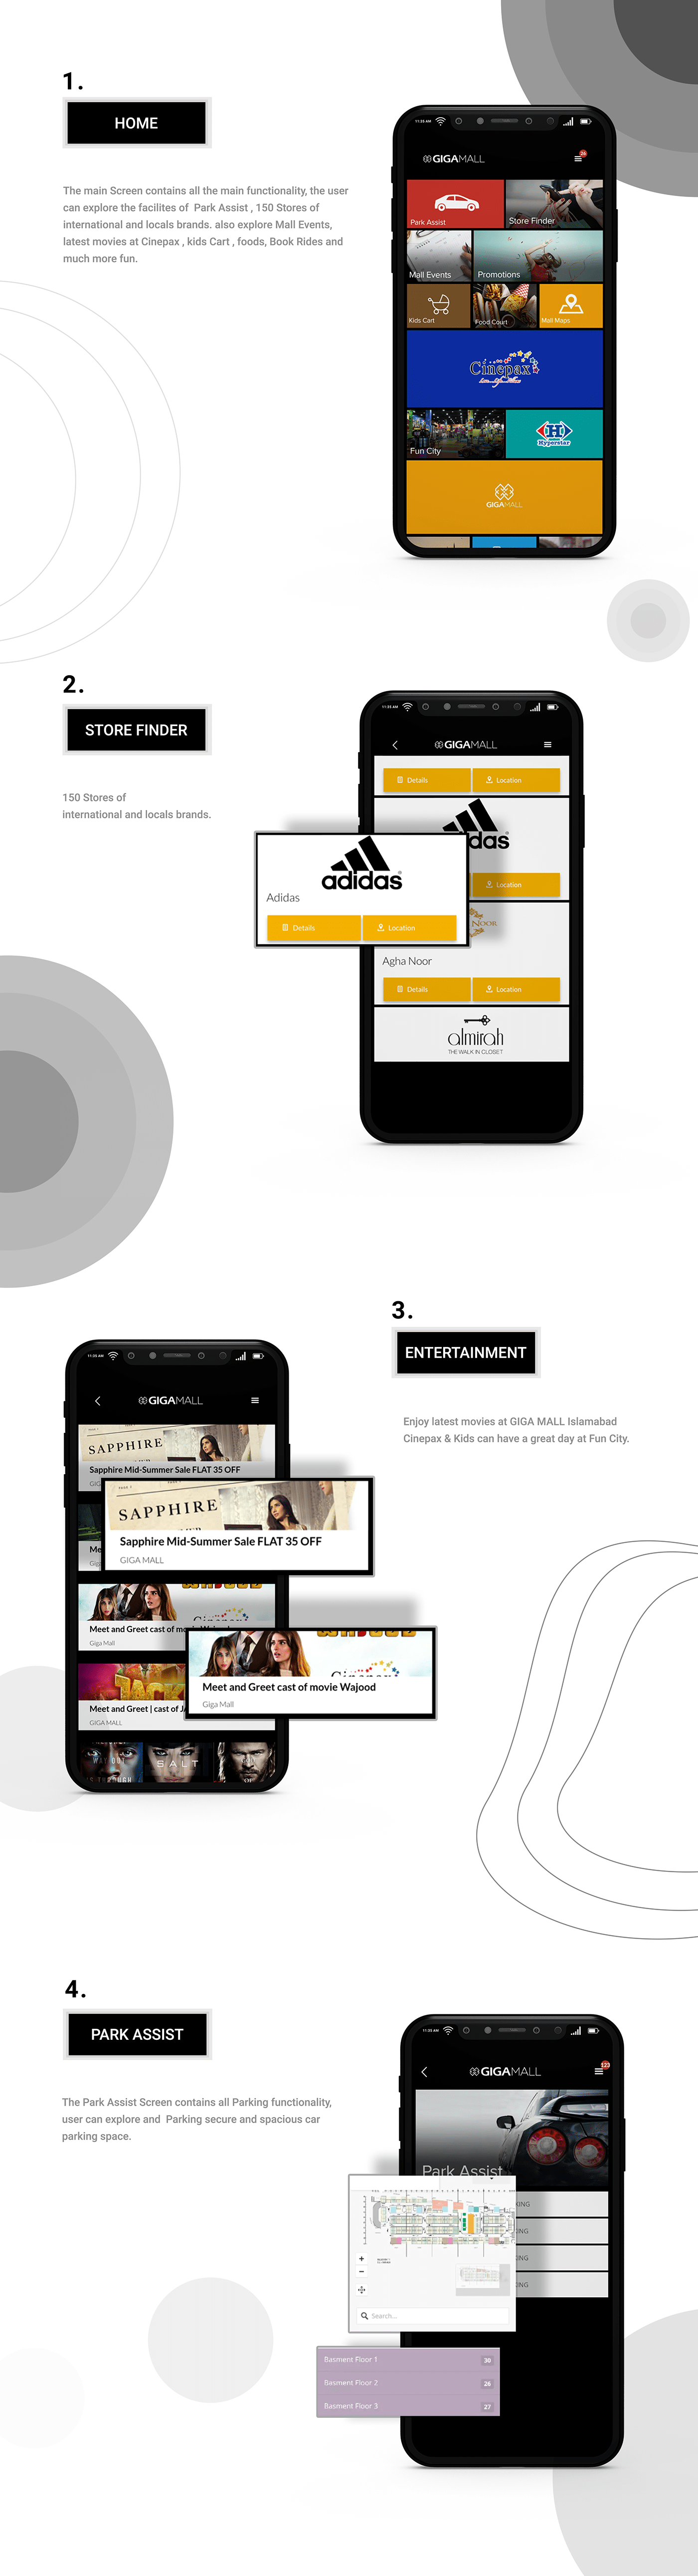 GIGAMALL app graphic design  Mobile app mobile design product design  ui design UI/UX Design UX design